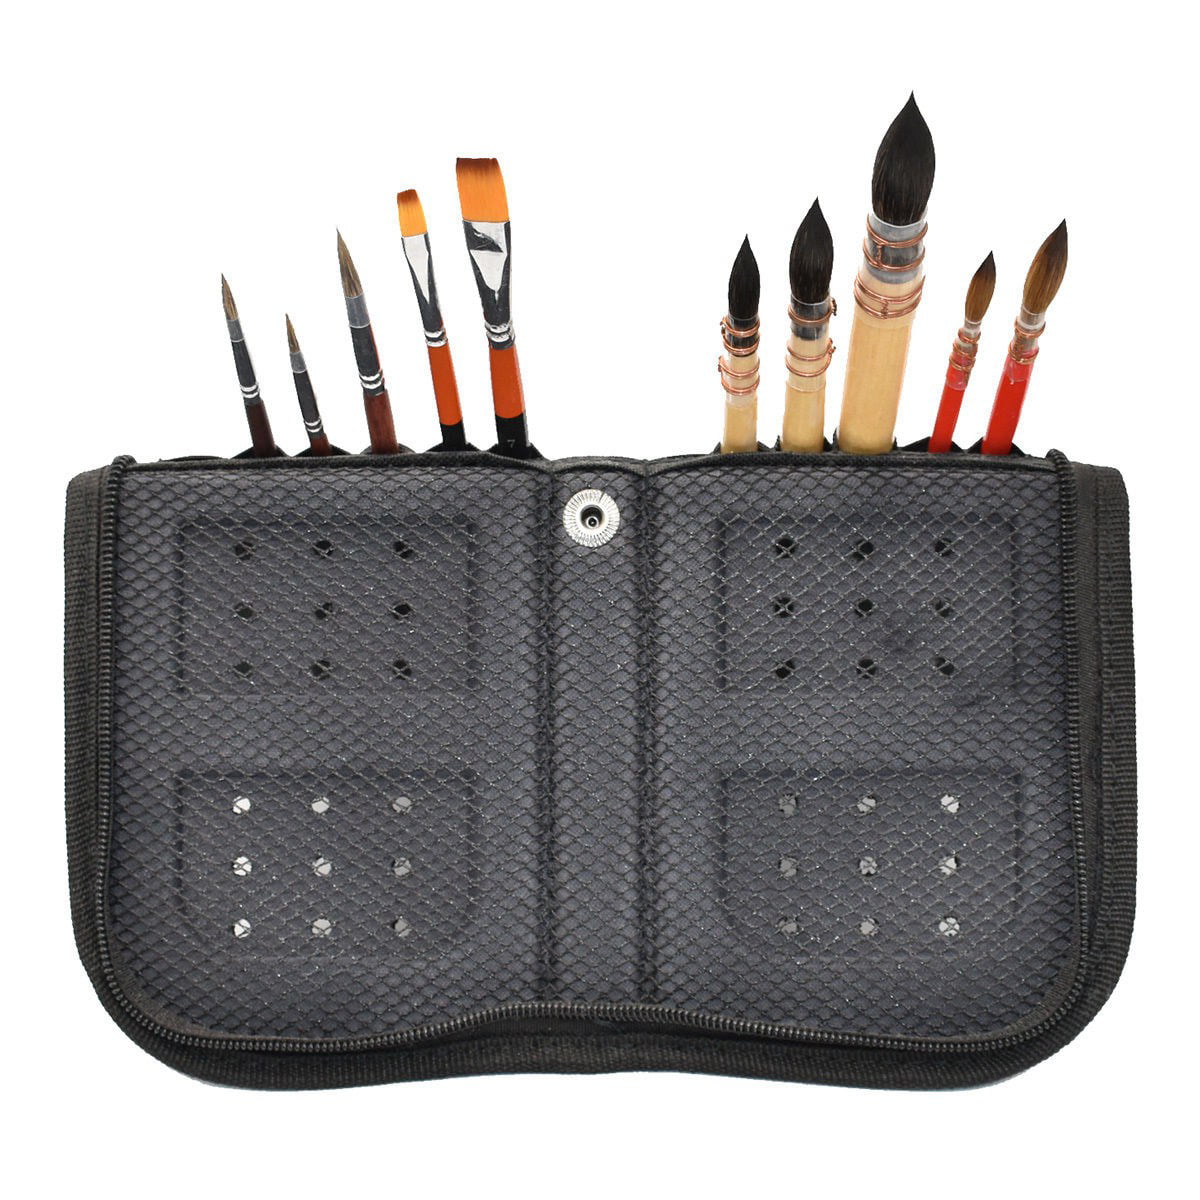 MEEDEN Paint Brush Holder, 11.5 X 10 Inch Zippered Painting Brush Case,  Organization and Storage Bag for Artist Paint Brush (Brushes NOT Included)